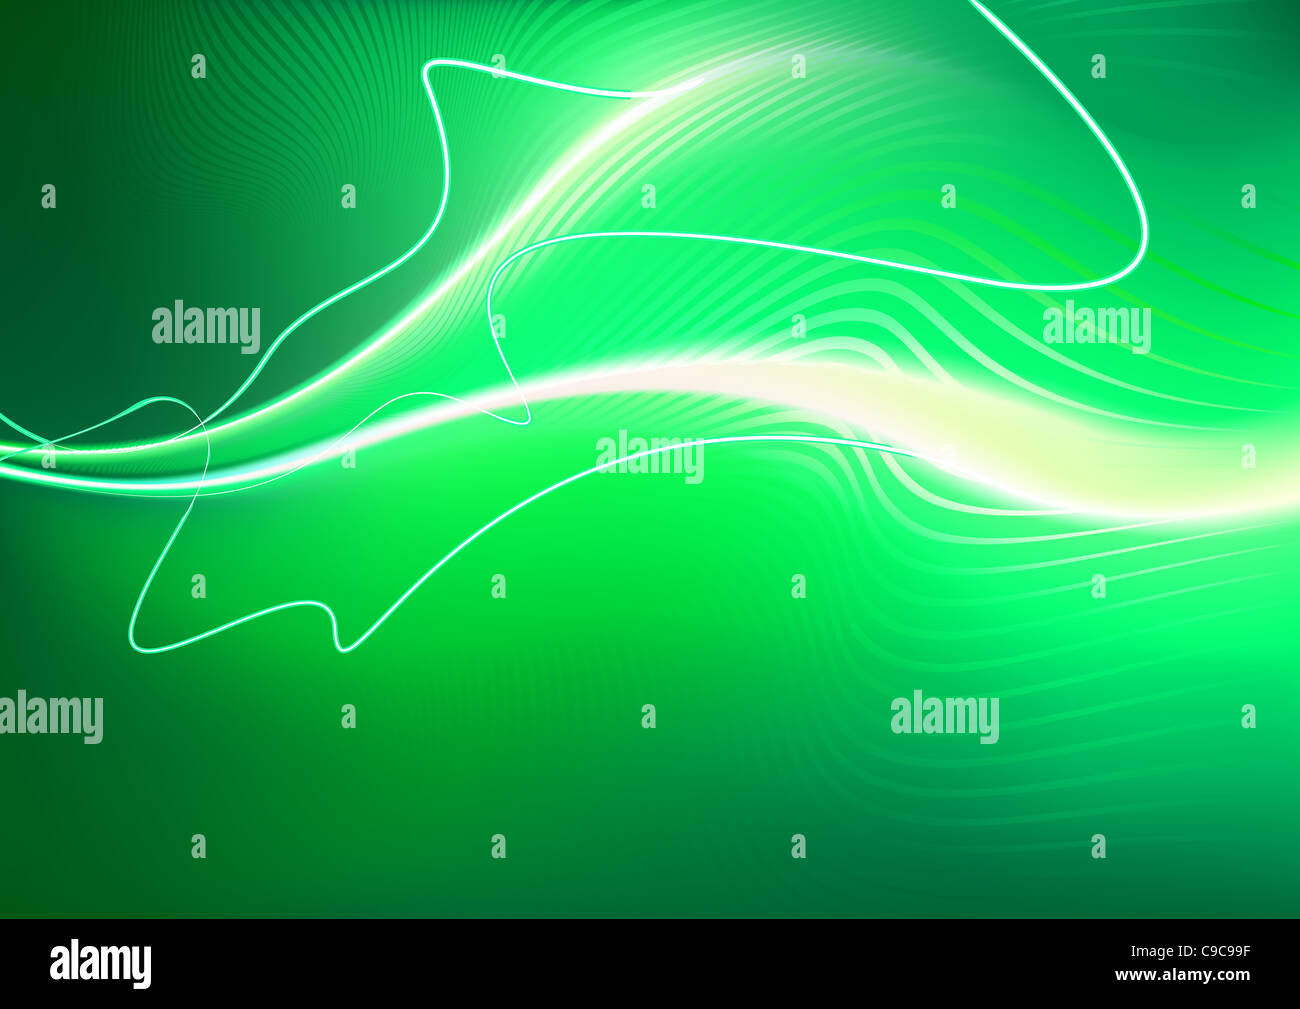 illustrated green futuristic background resembling a jellyfish-like creature at top speed on top of motion-blurred fire Stock Photo